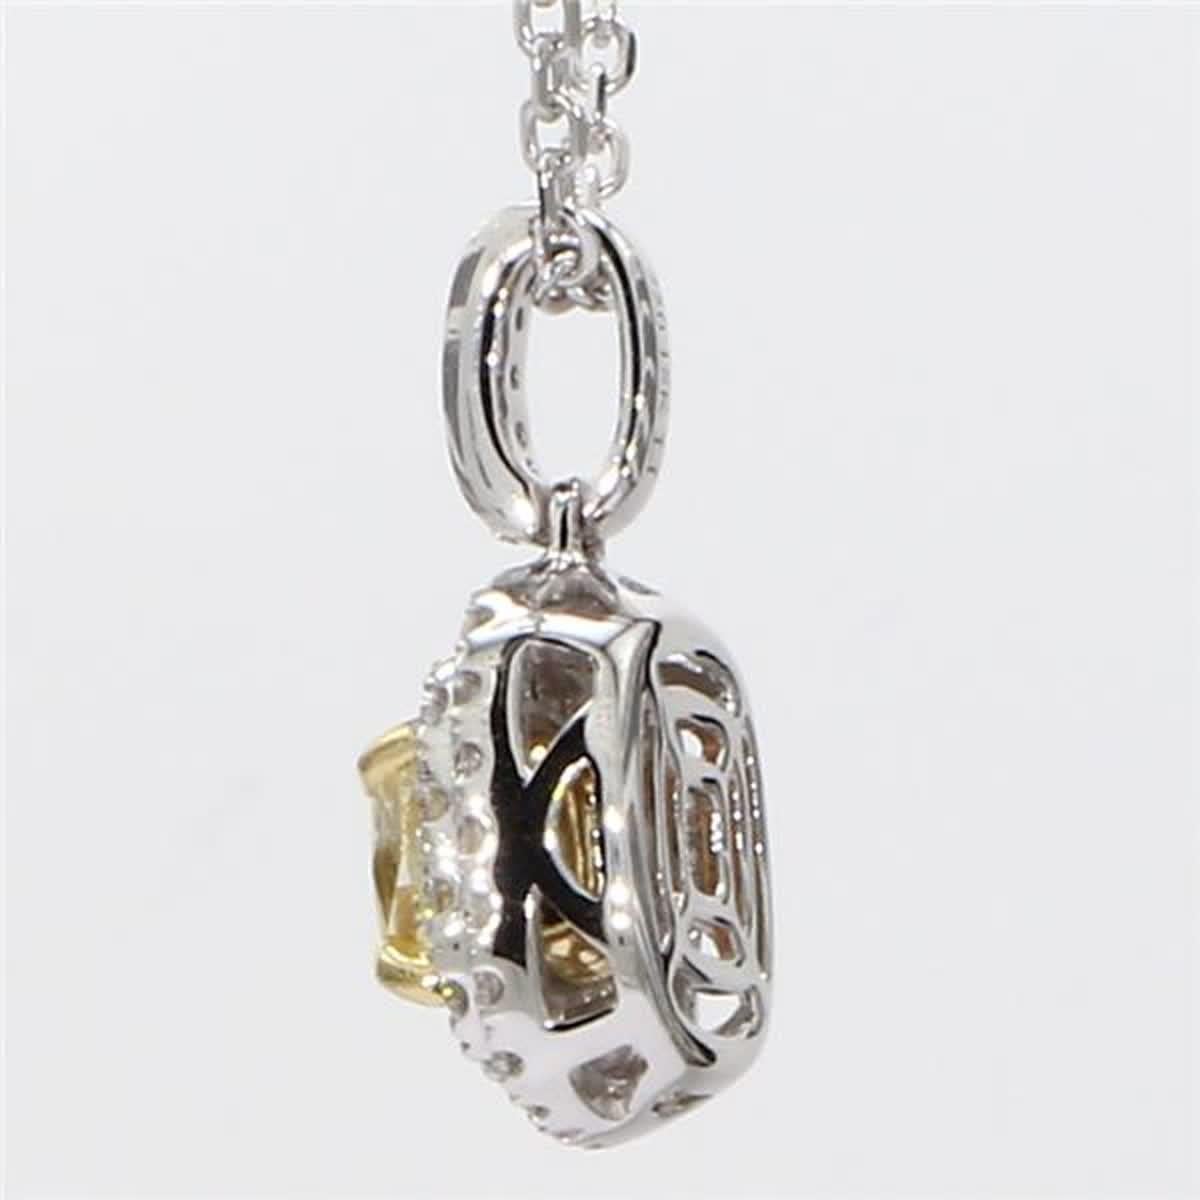 Cushion Cut GIA Certified Natural Yellow Cushion and White Diamond 1.00 Carat Gold Pendant For Sale